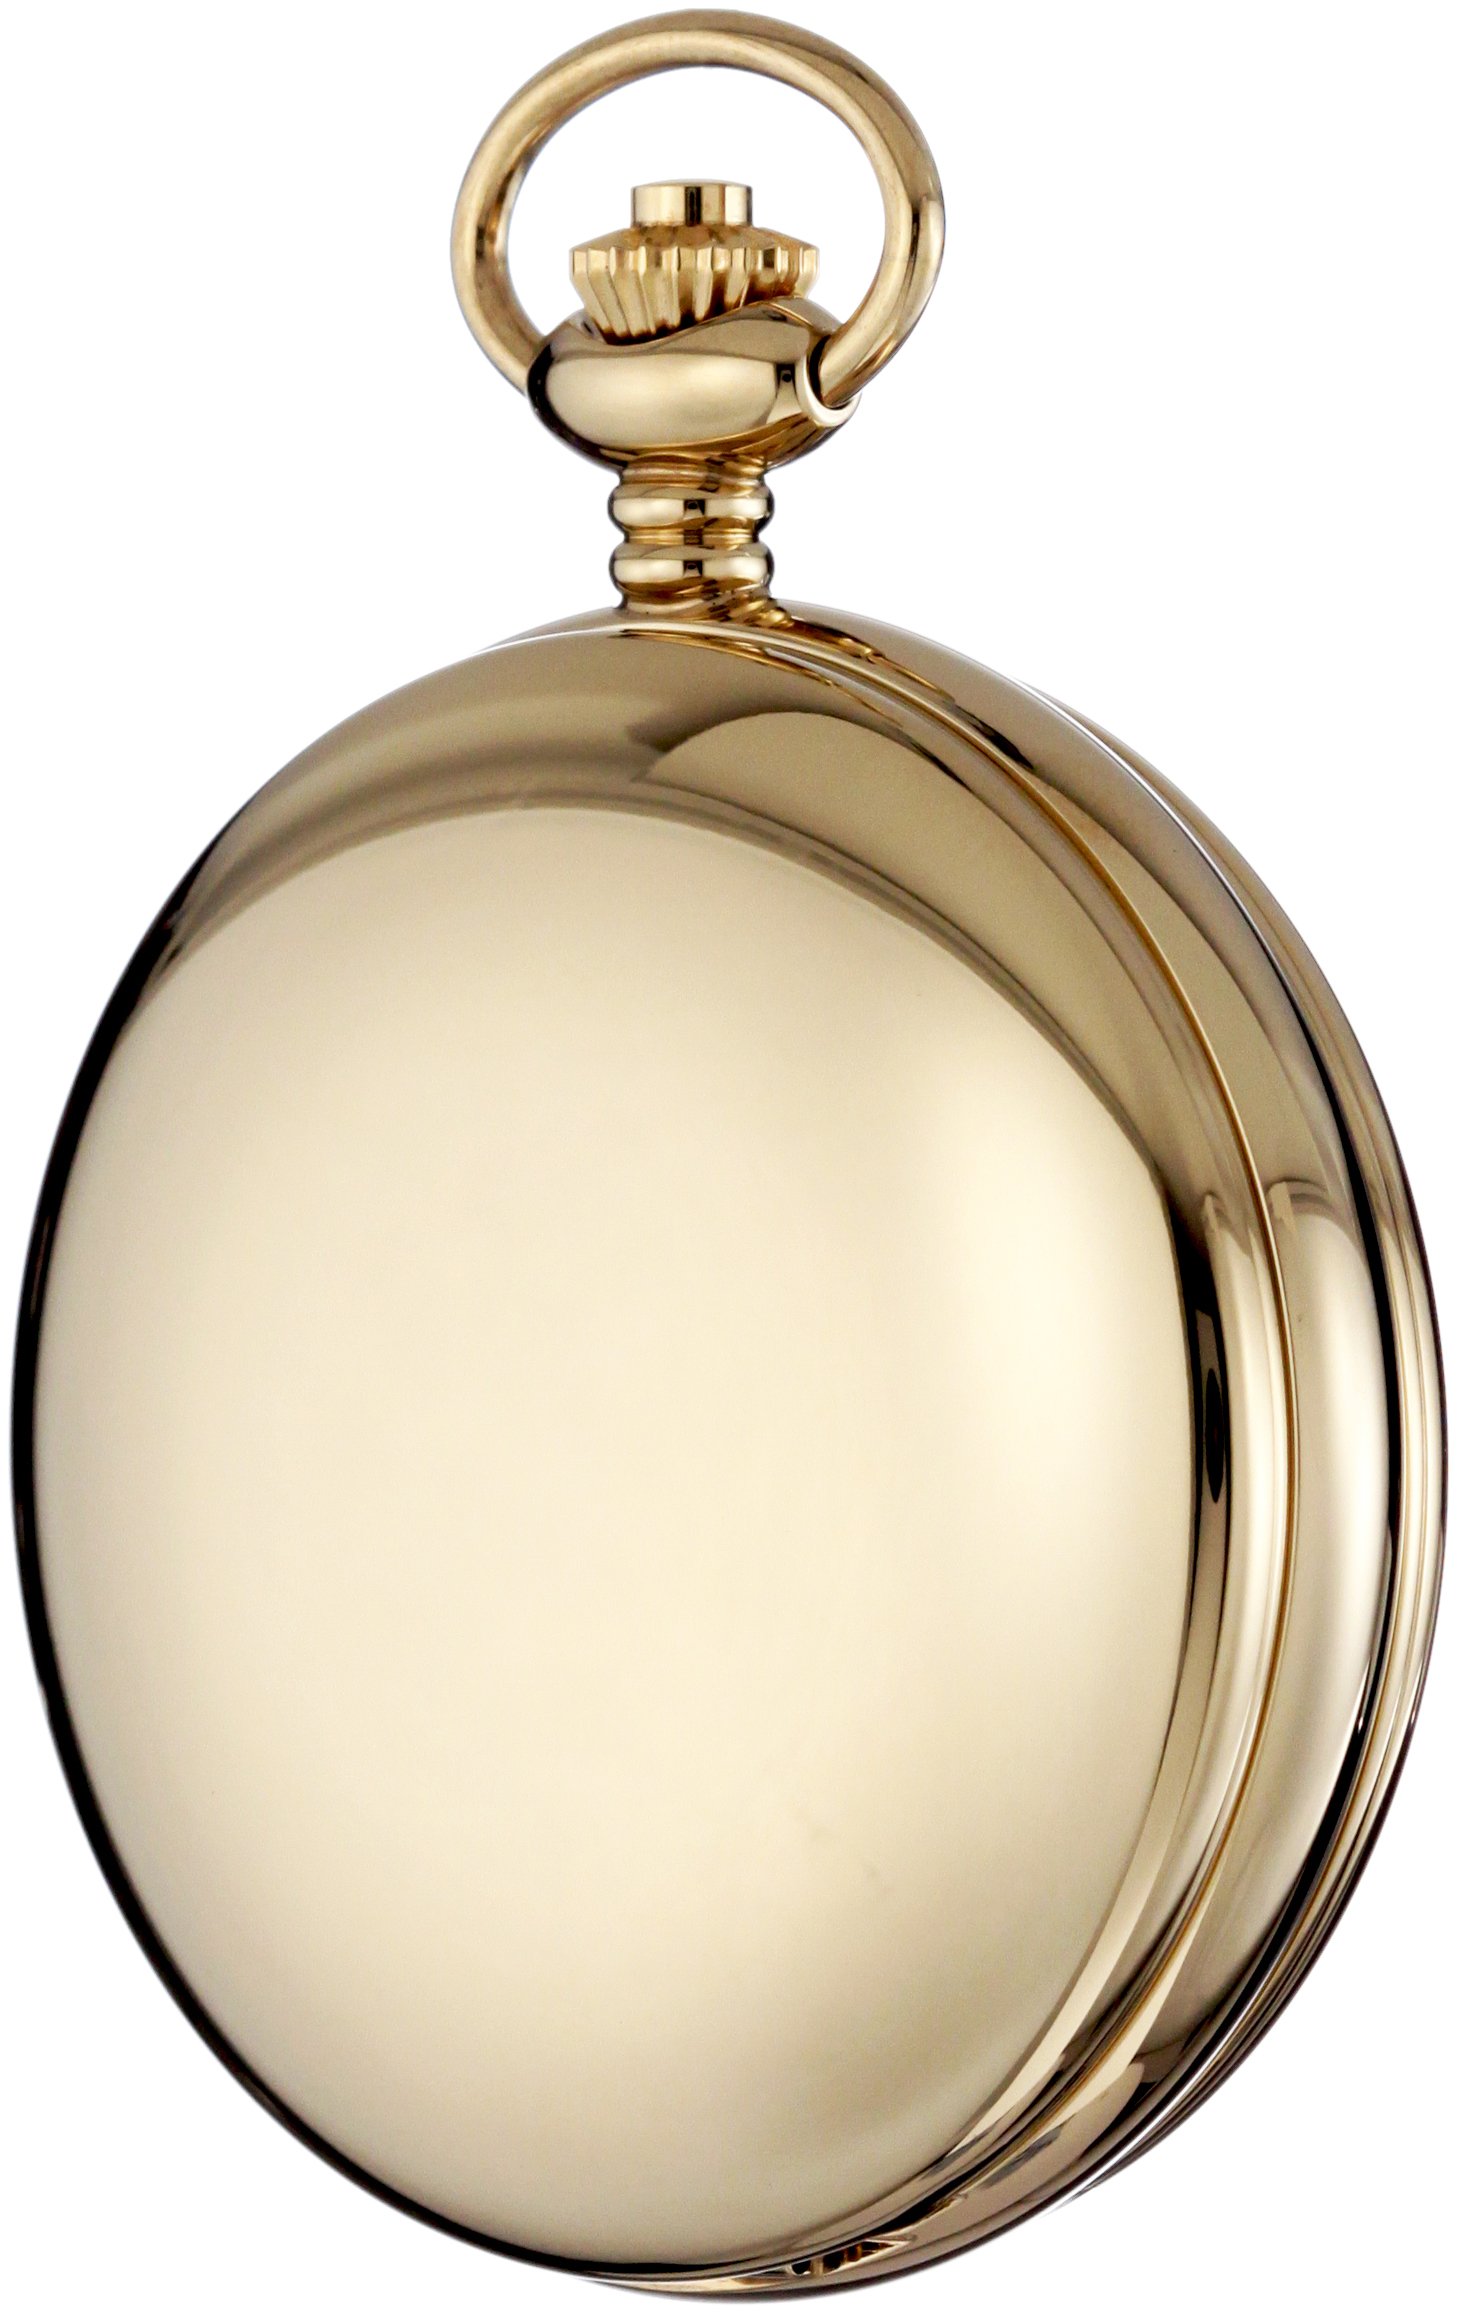 Charles-Hubert, Paris 3907-GRR Premium Collection Gold-Plated Stainless Steel Polished Finish Double Hunter Case Mechanical Pocket Watch